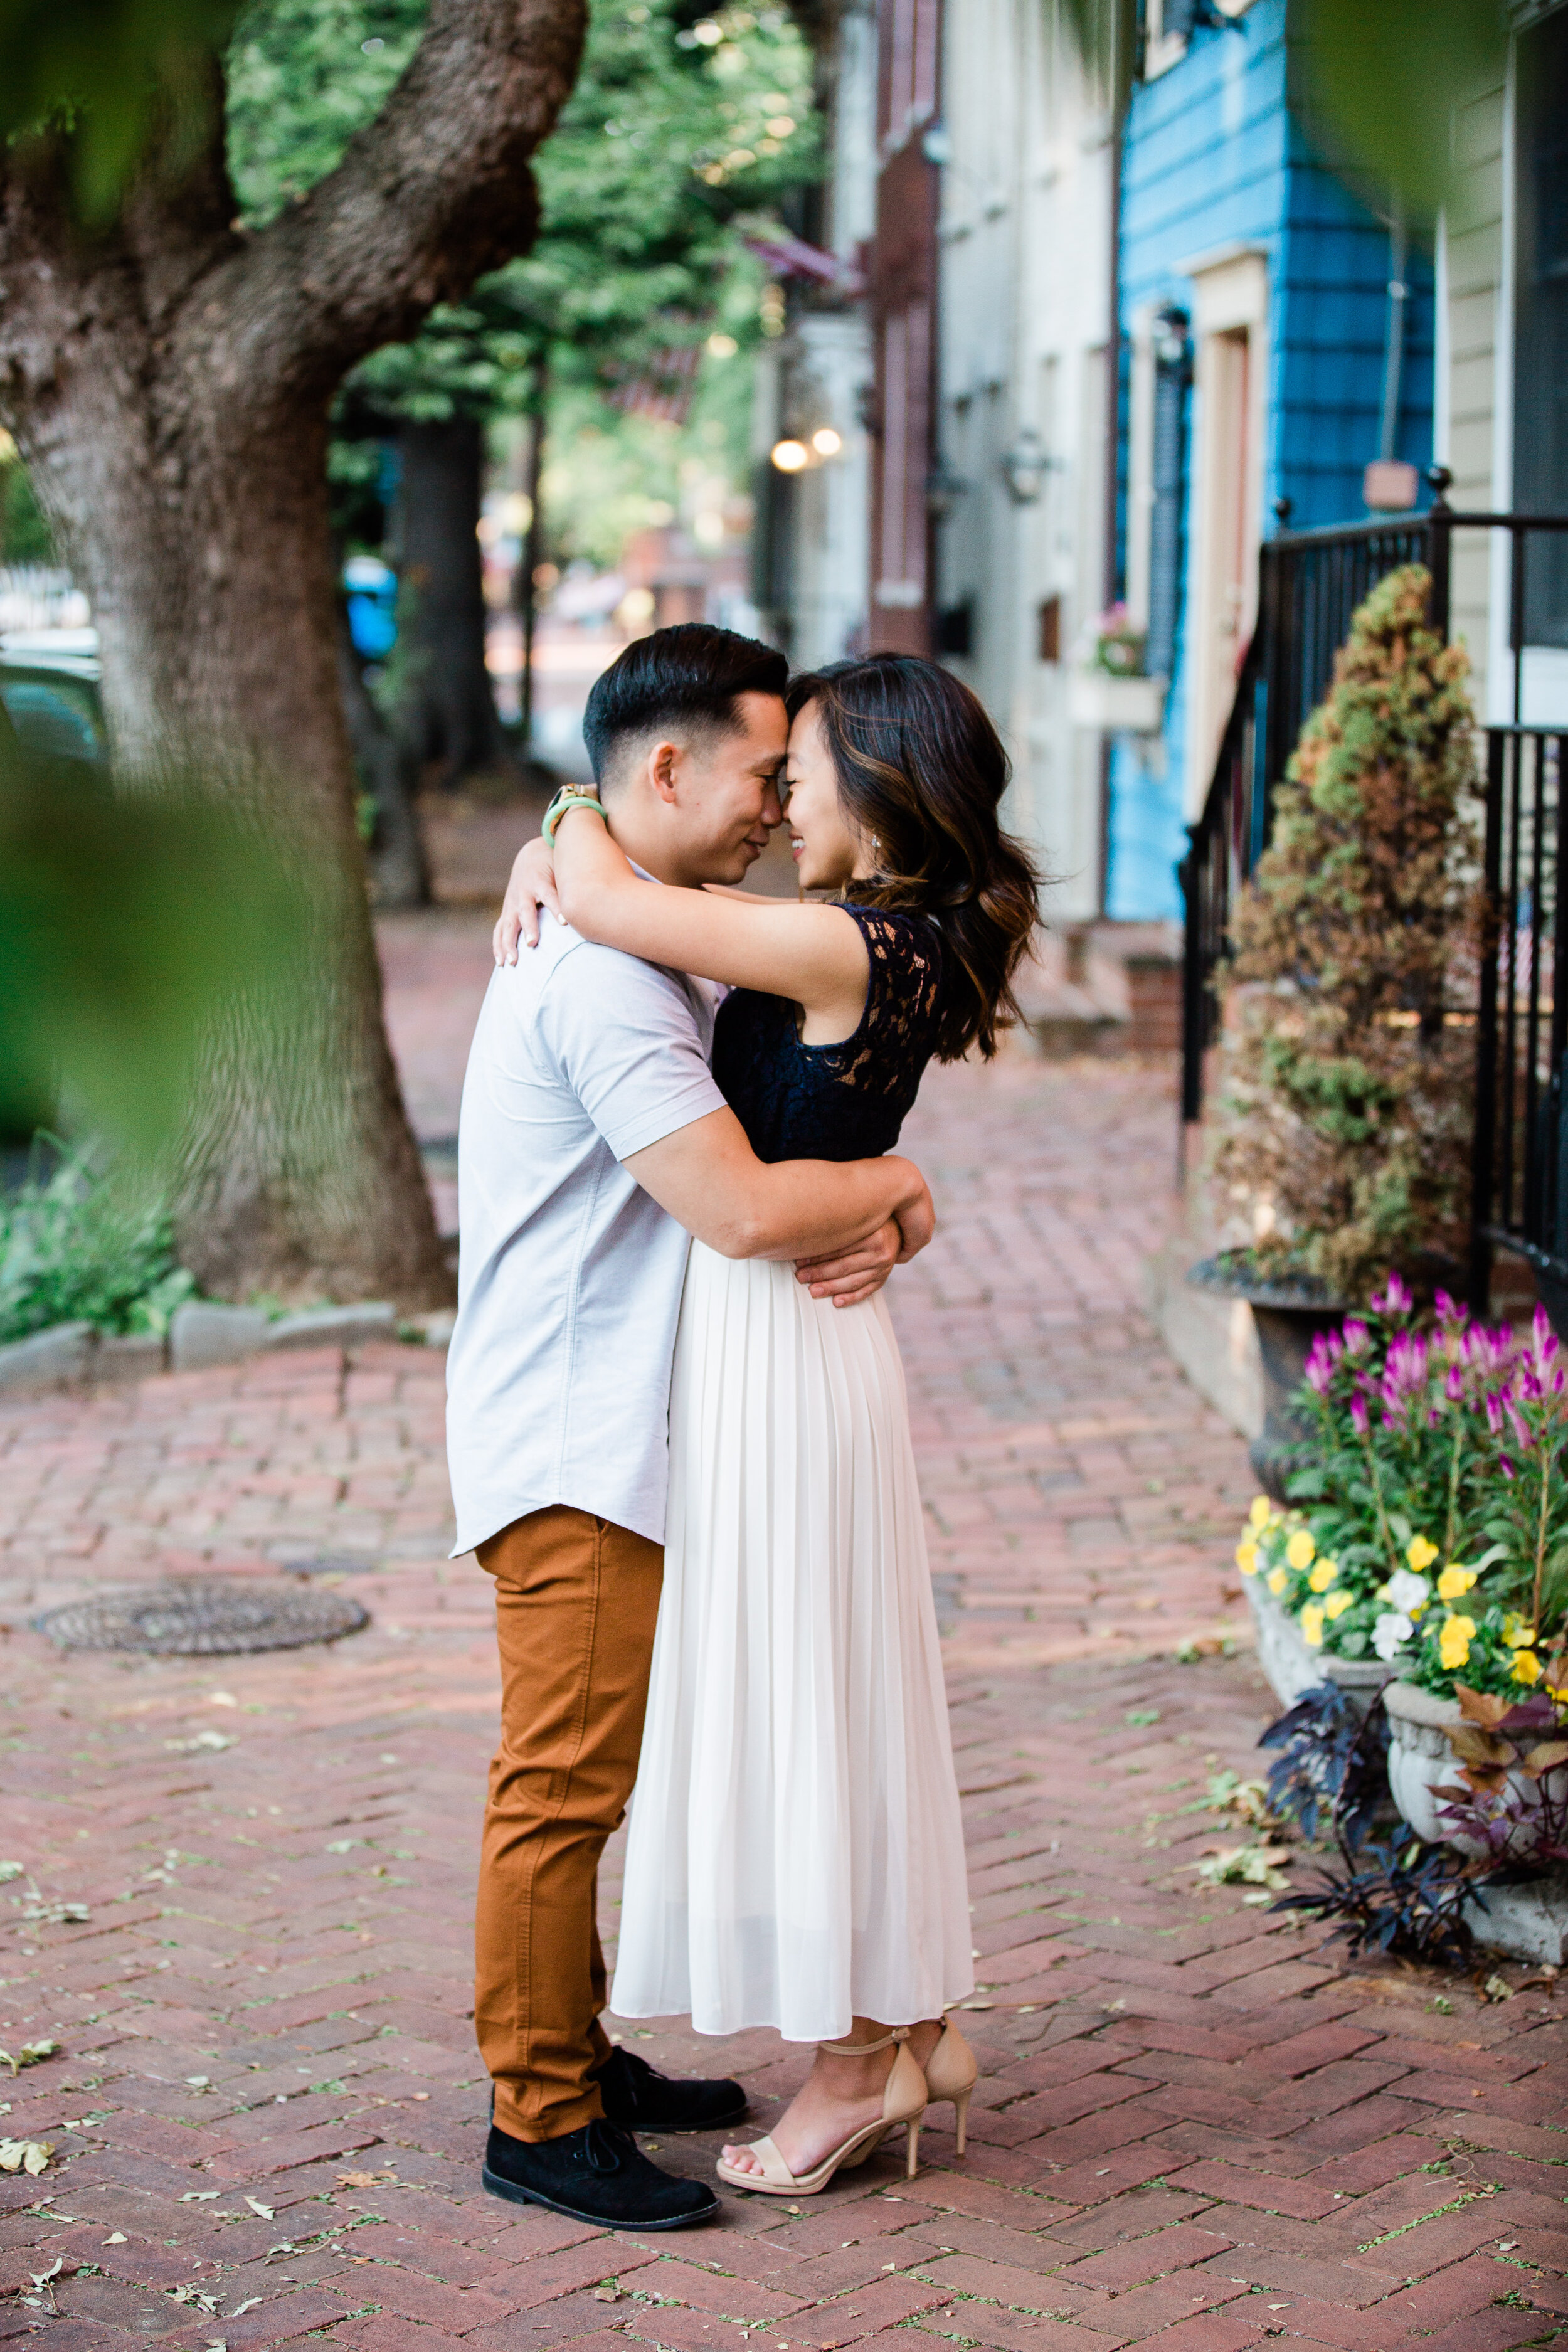 old_town_alexandria_engagements-4198.jpg